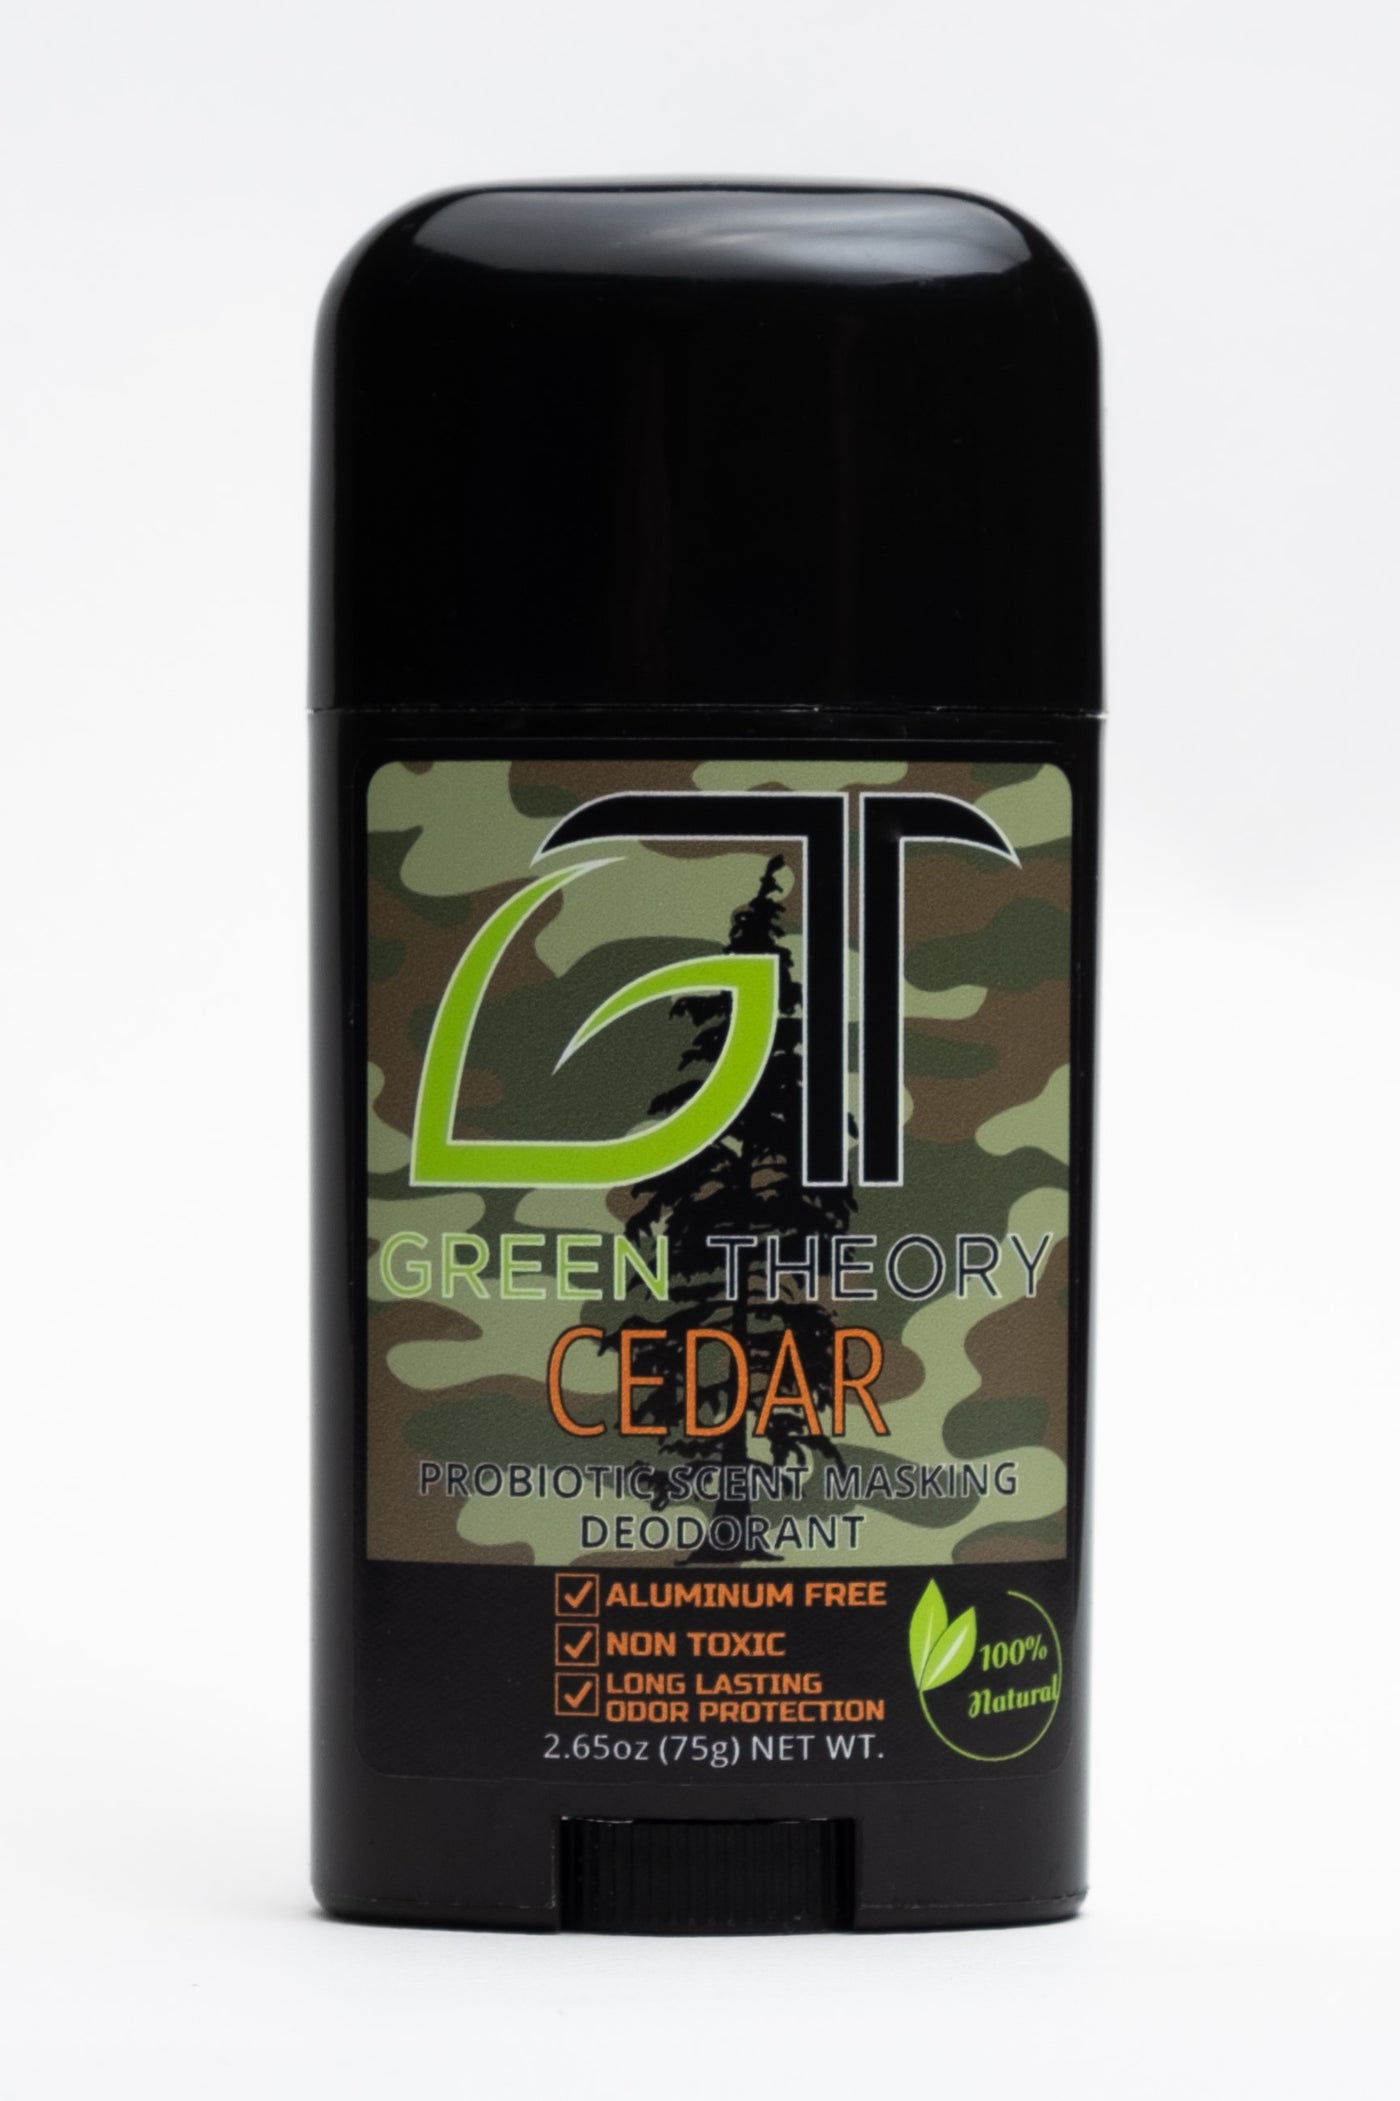 Photo of the front of a stick of green theory cedar probiotic aluminum free natural deodorant. Product is in a shiny black plastic container standing up against a white background. Front label feature large stylized GT logo with the "g" in the shape of a leaf. The background is a brown camouflage pattern and the word "cedar" is depeicted in orange font with aluminum free, non toxic and long lasting odor protection benefits listed below